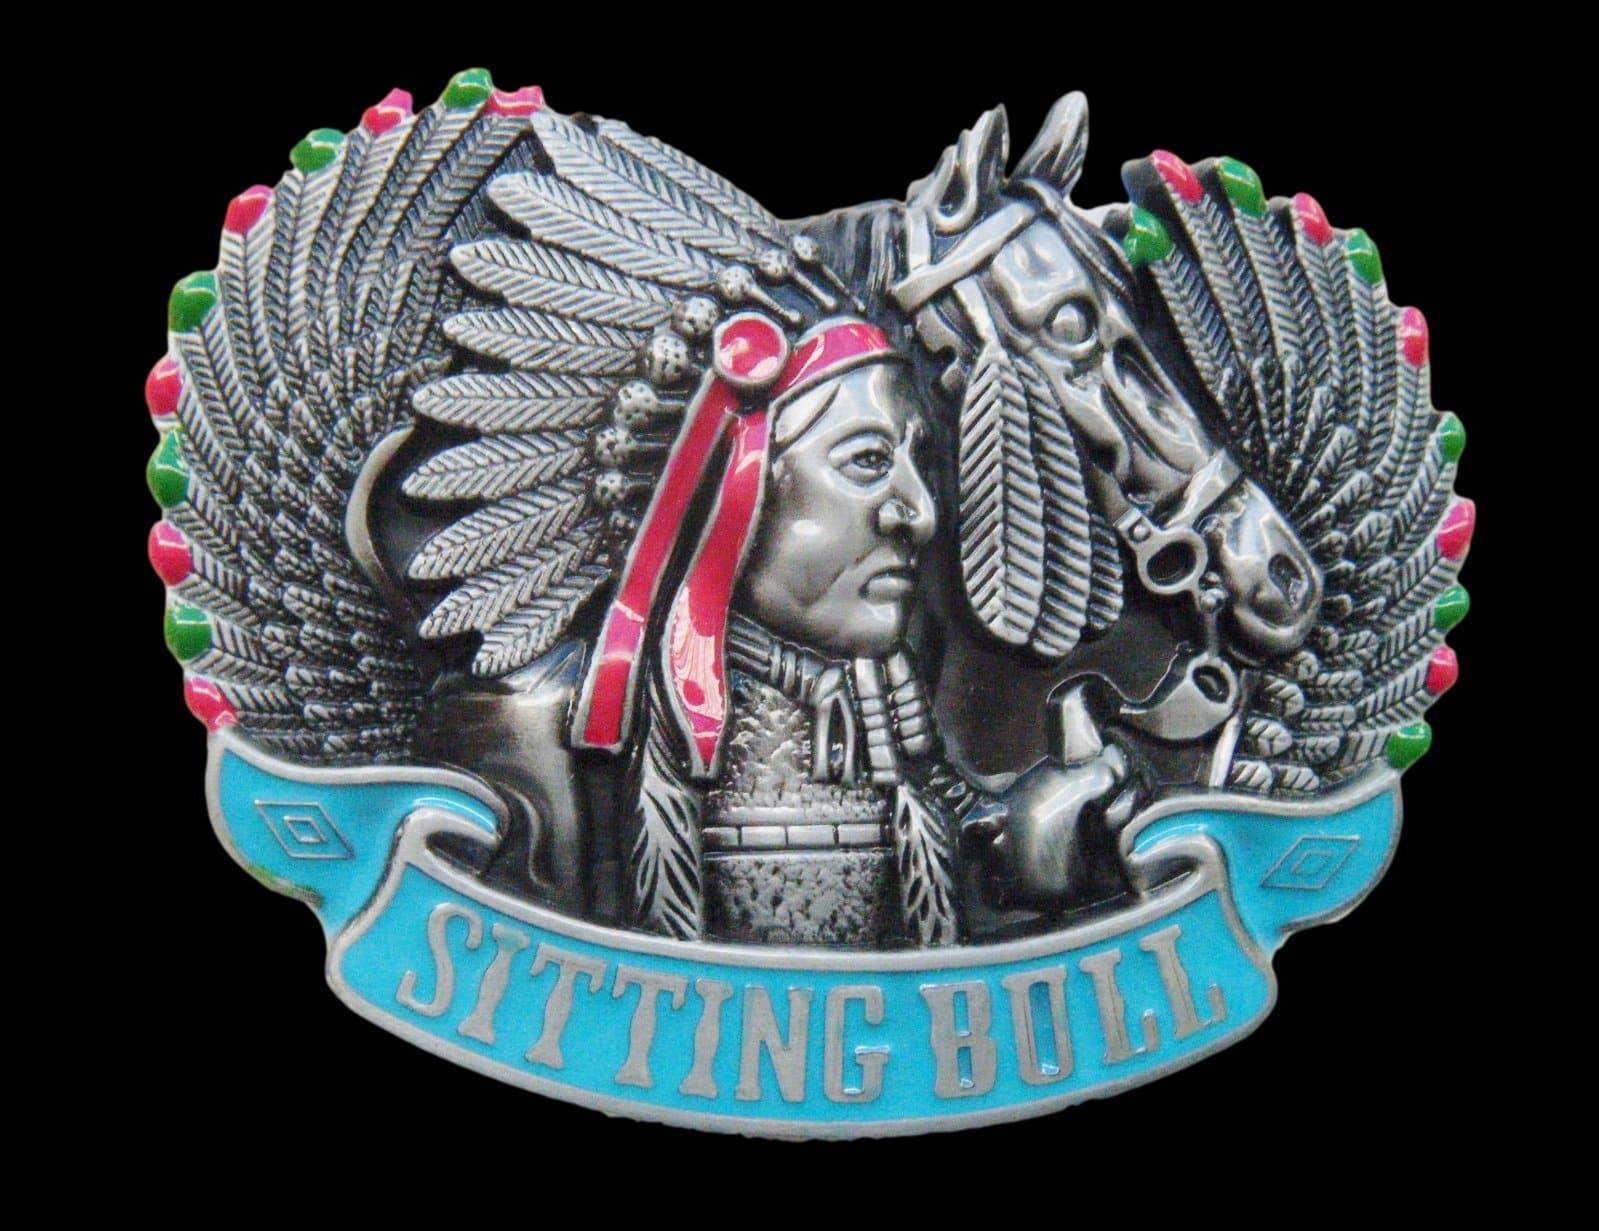 Sitting Bull Indian Chief Feathers Native American Belt Buckle Buckles - Buckles.Biz